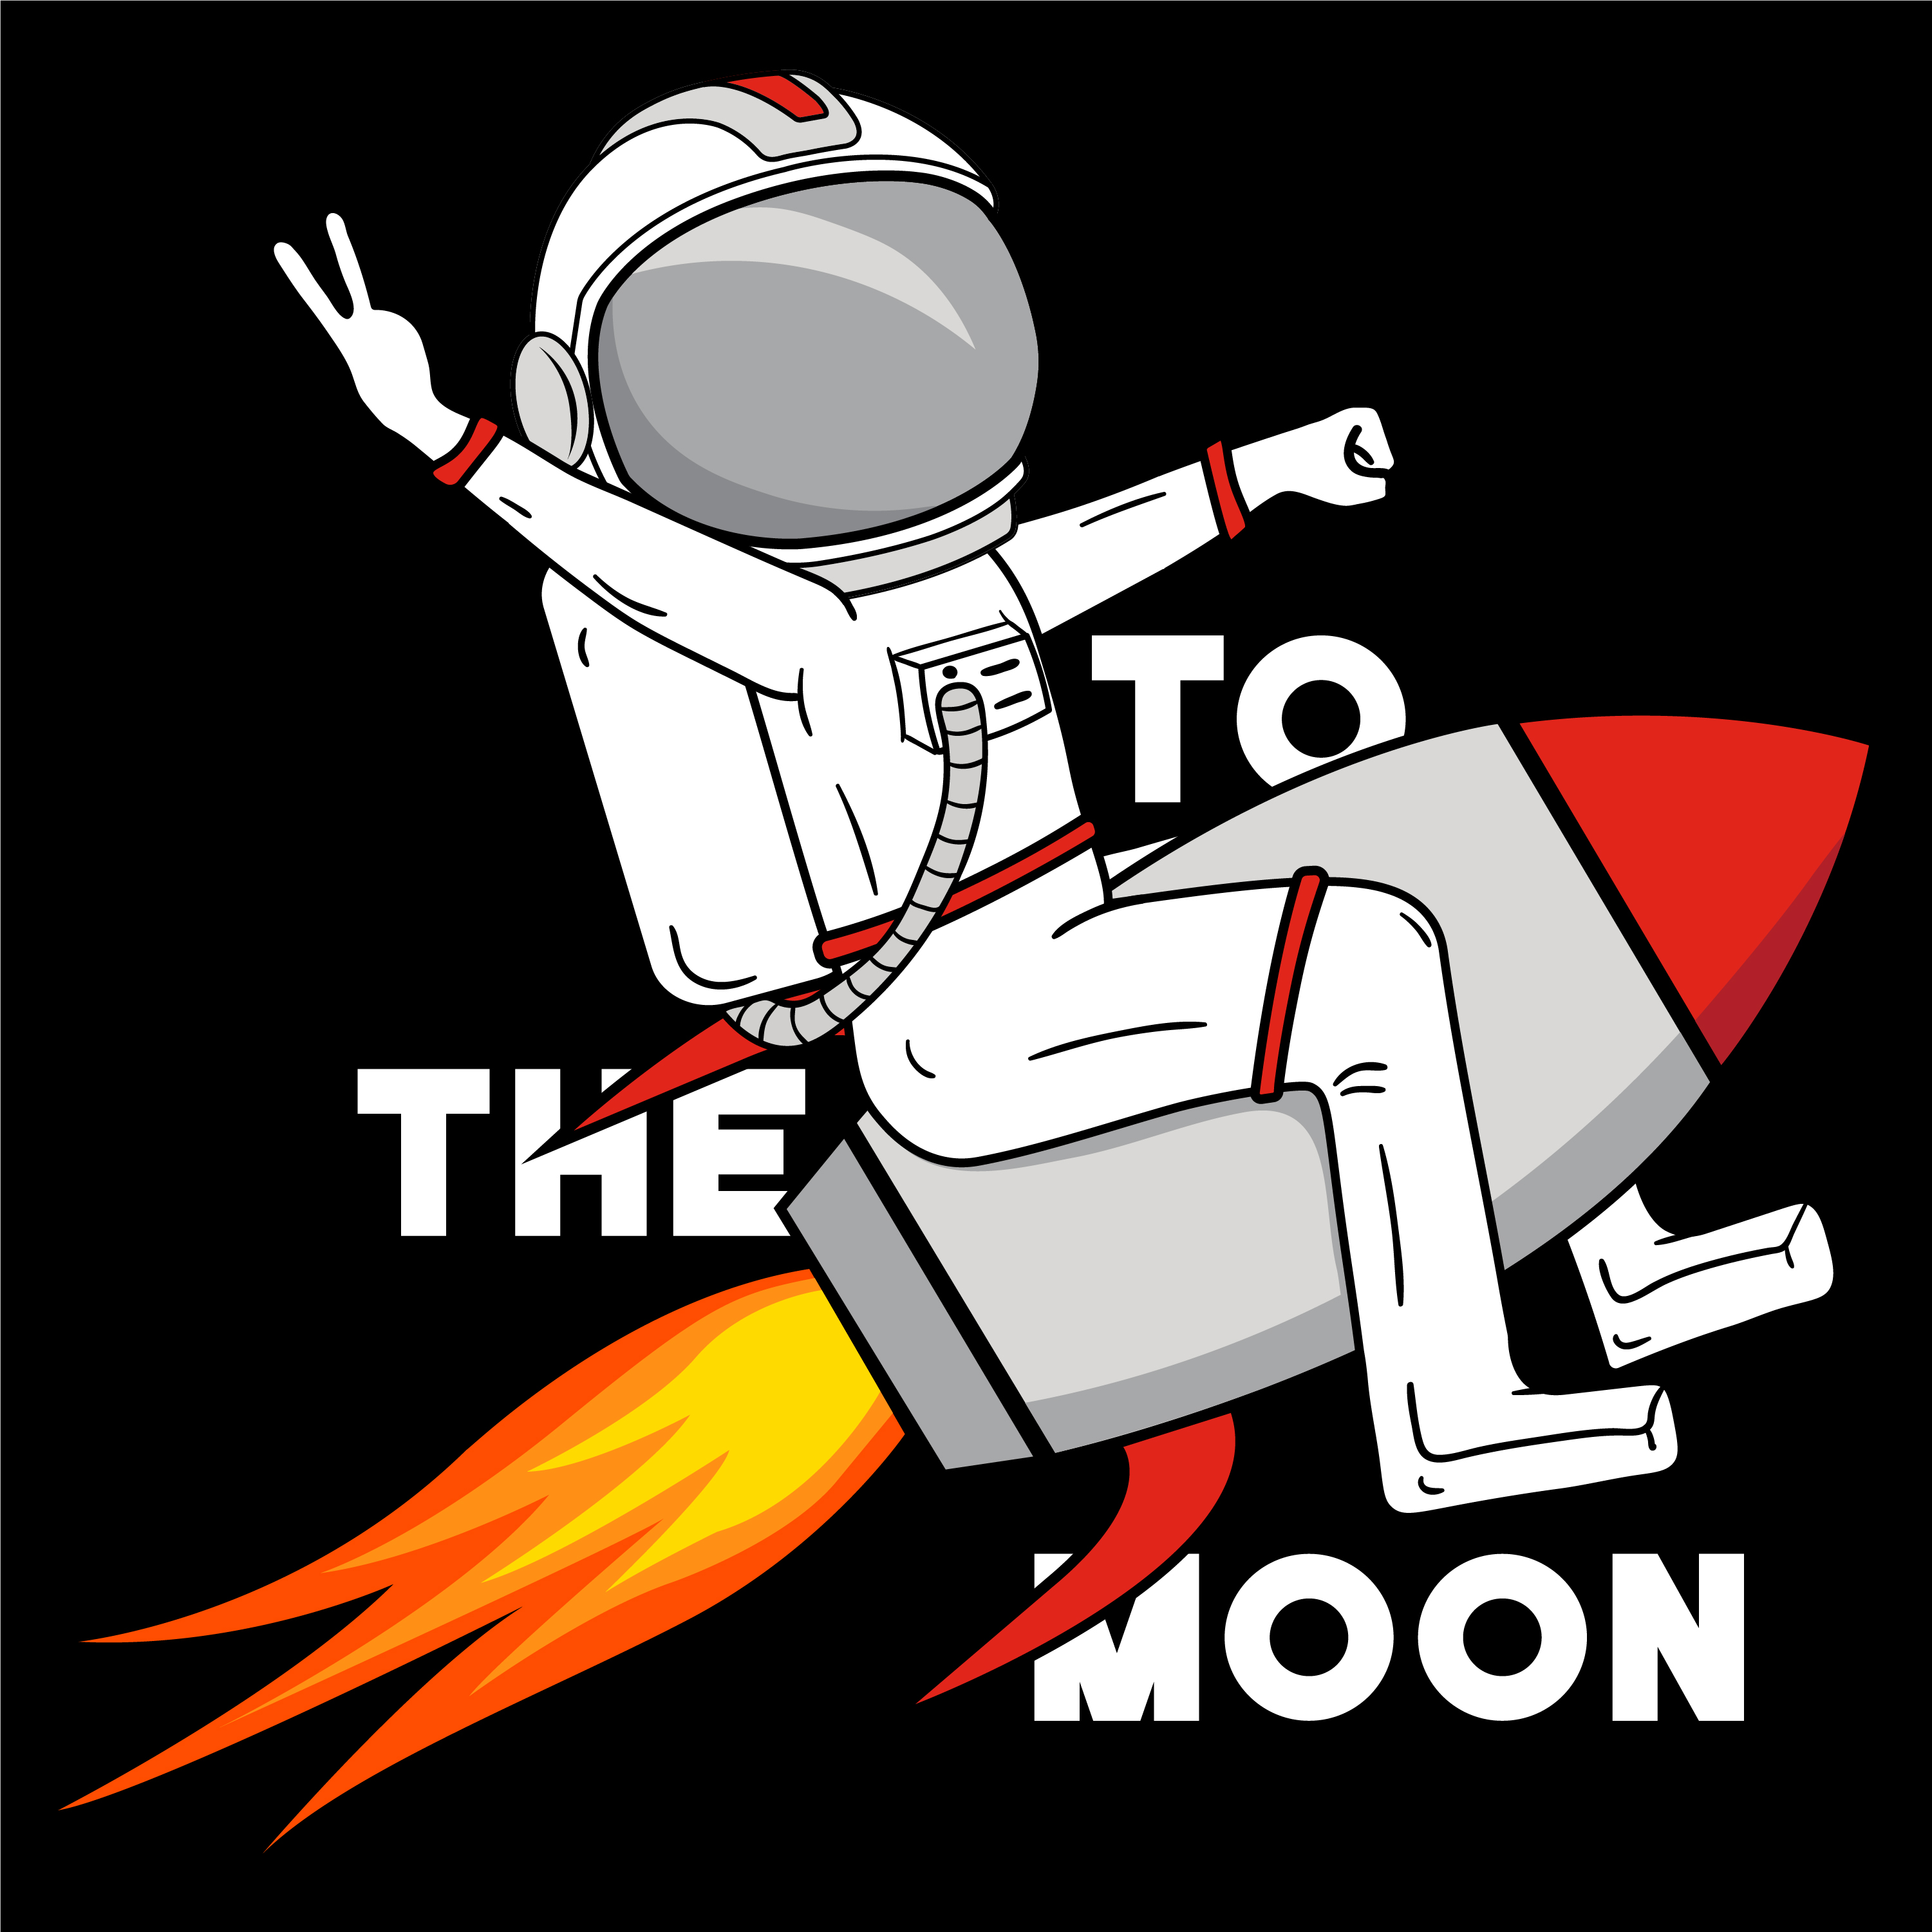 To The Moon!